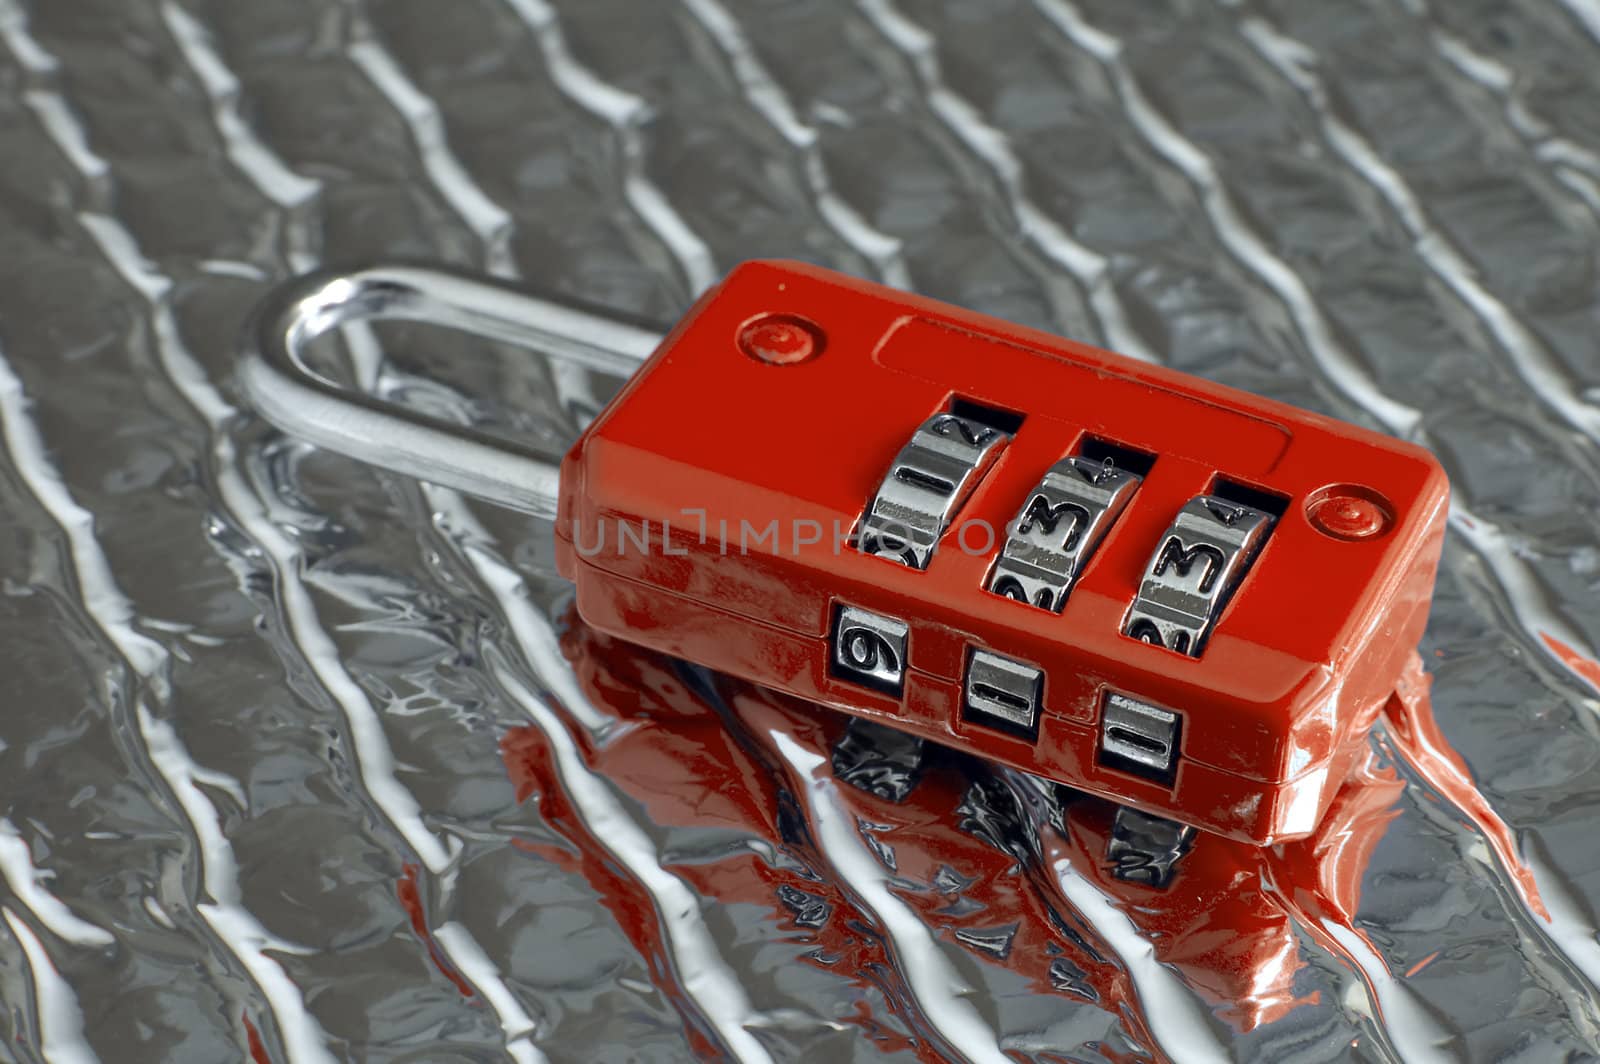 small red lock with emergency code 911, silver background